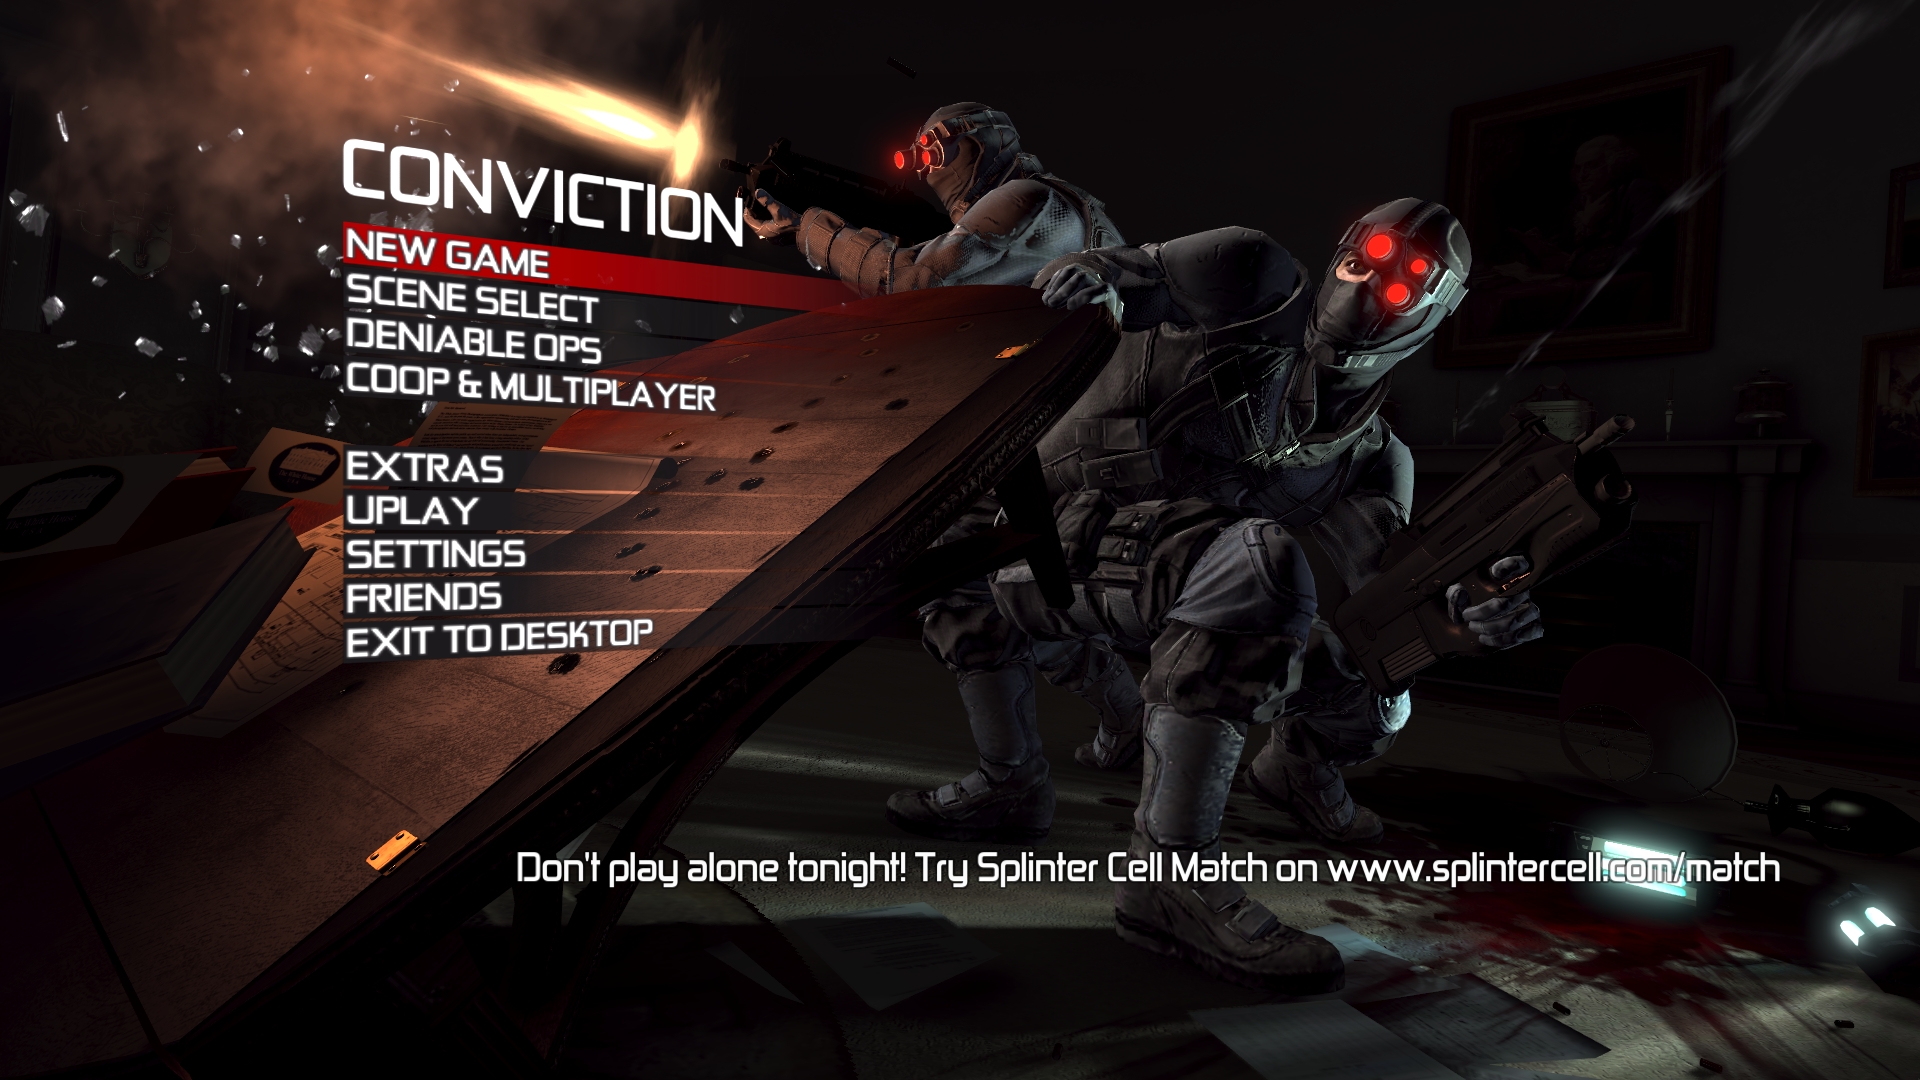 How to force 1920x1080 (or higher) on win7/8 for Tom Clancy's Splinter Cell: Conviction